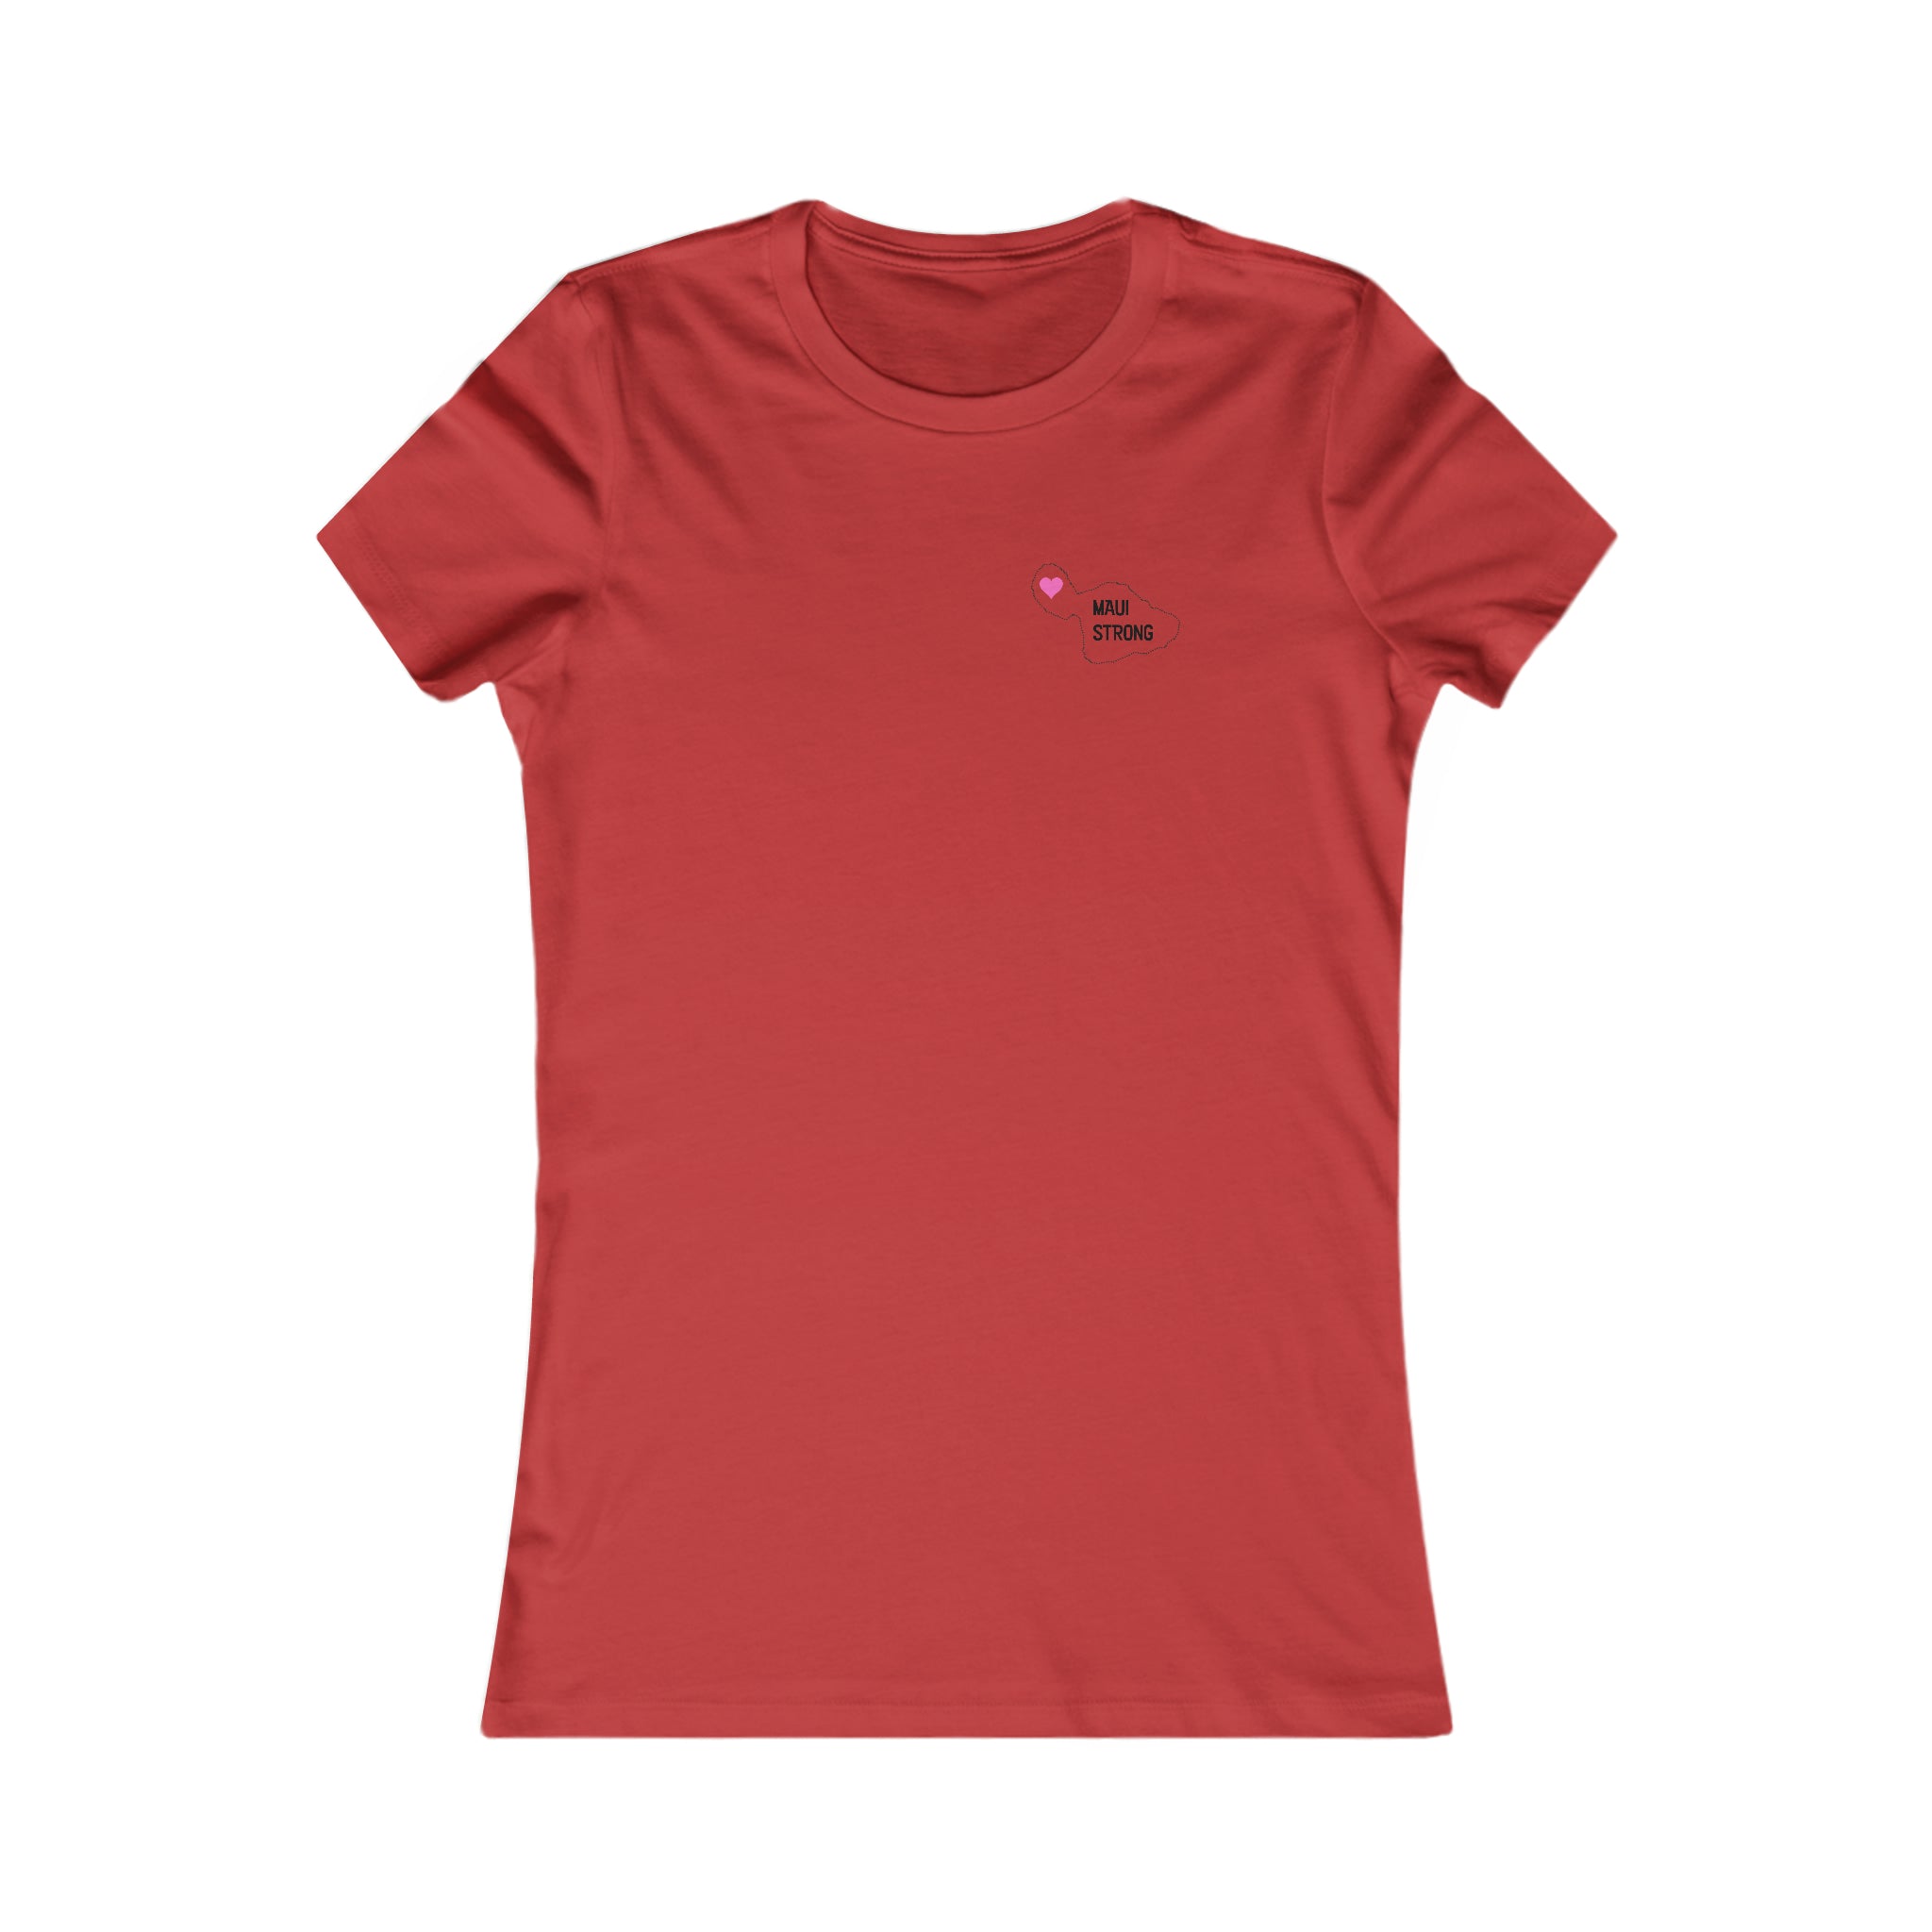 Women's Slim Fit Tee - Maui Strong